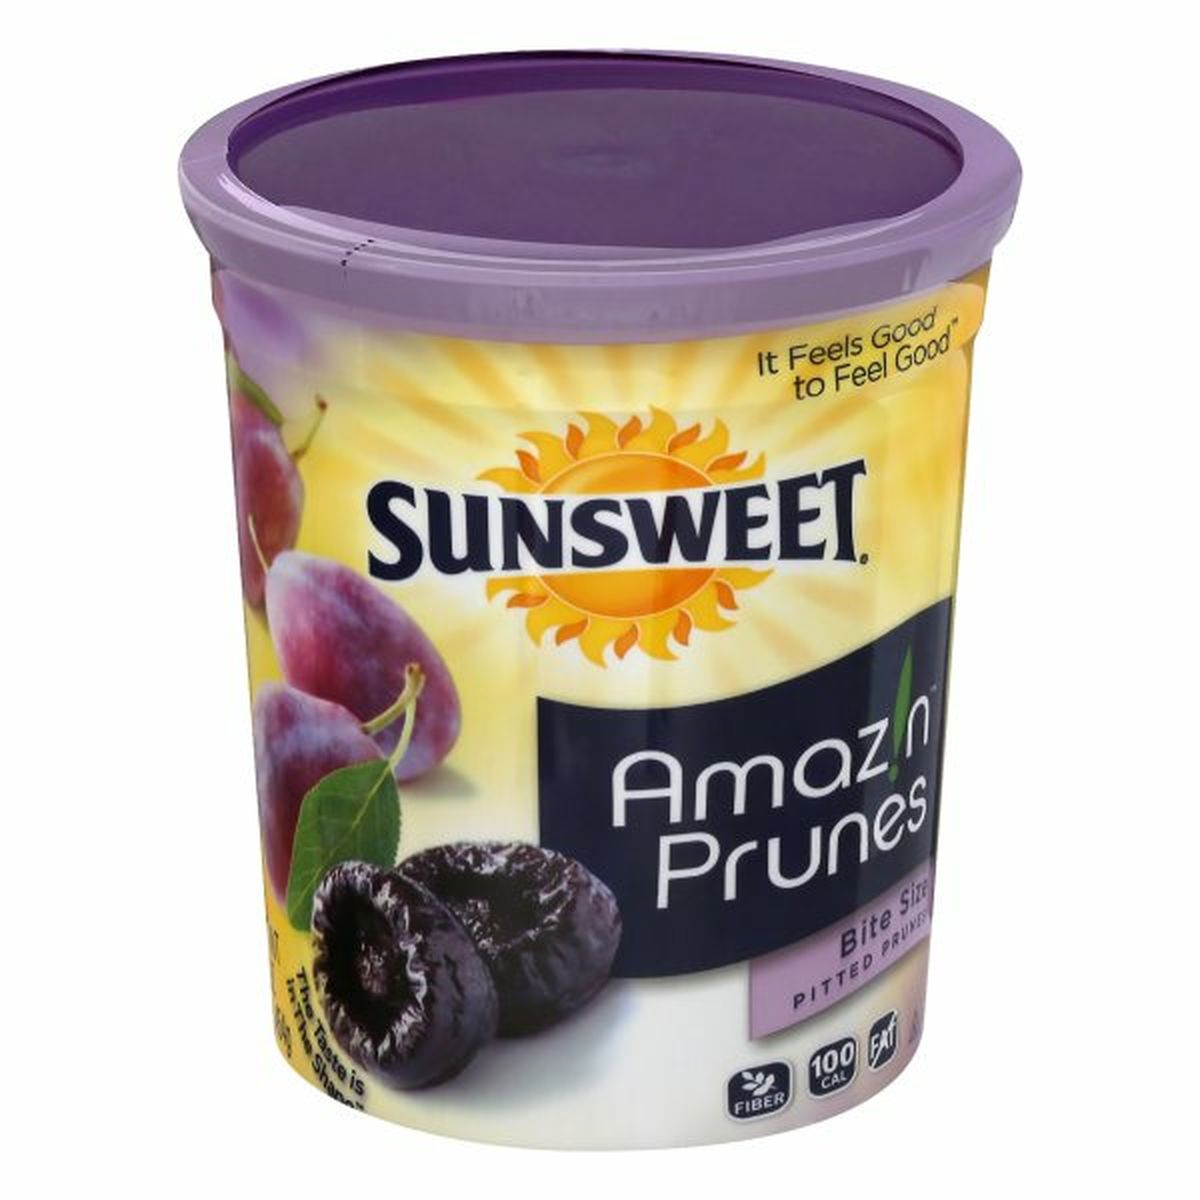 Calories in Sunsweet Prunes, Pitted, Bite Size